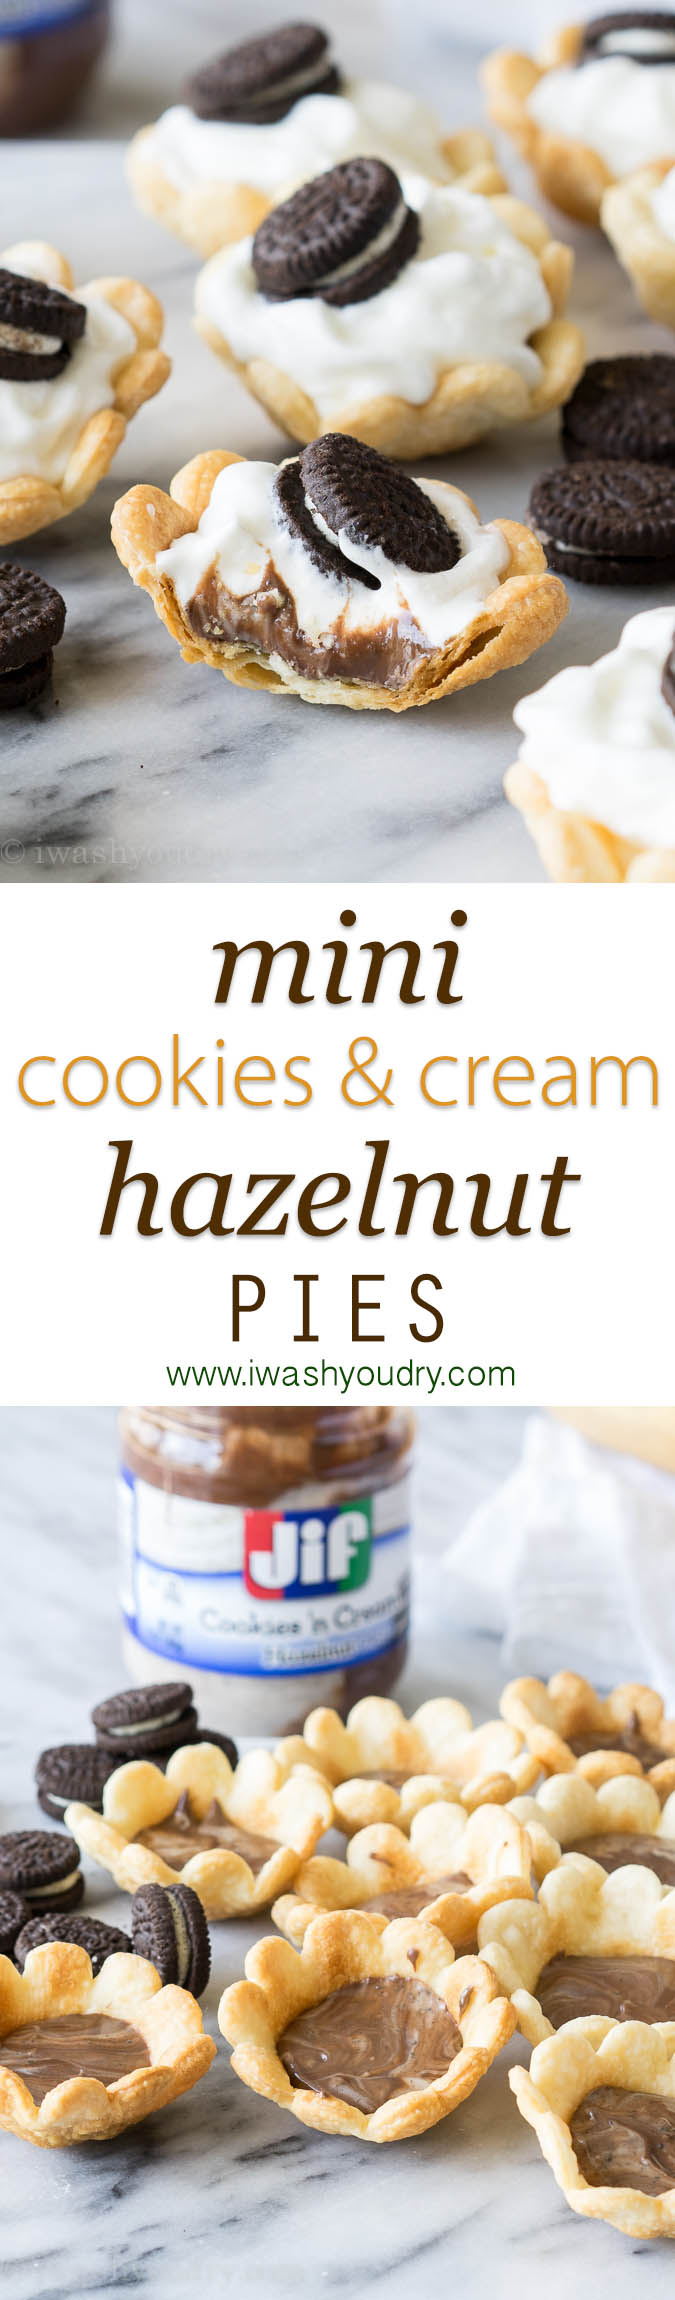 Just 4 ingredients for these crazy good Mini Cookies and Cream Hazelnut Pies!